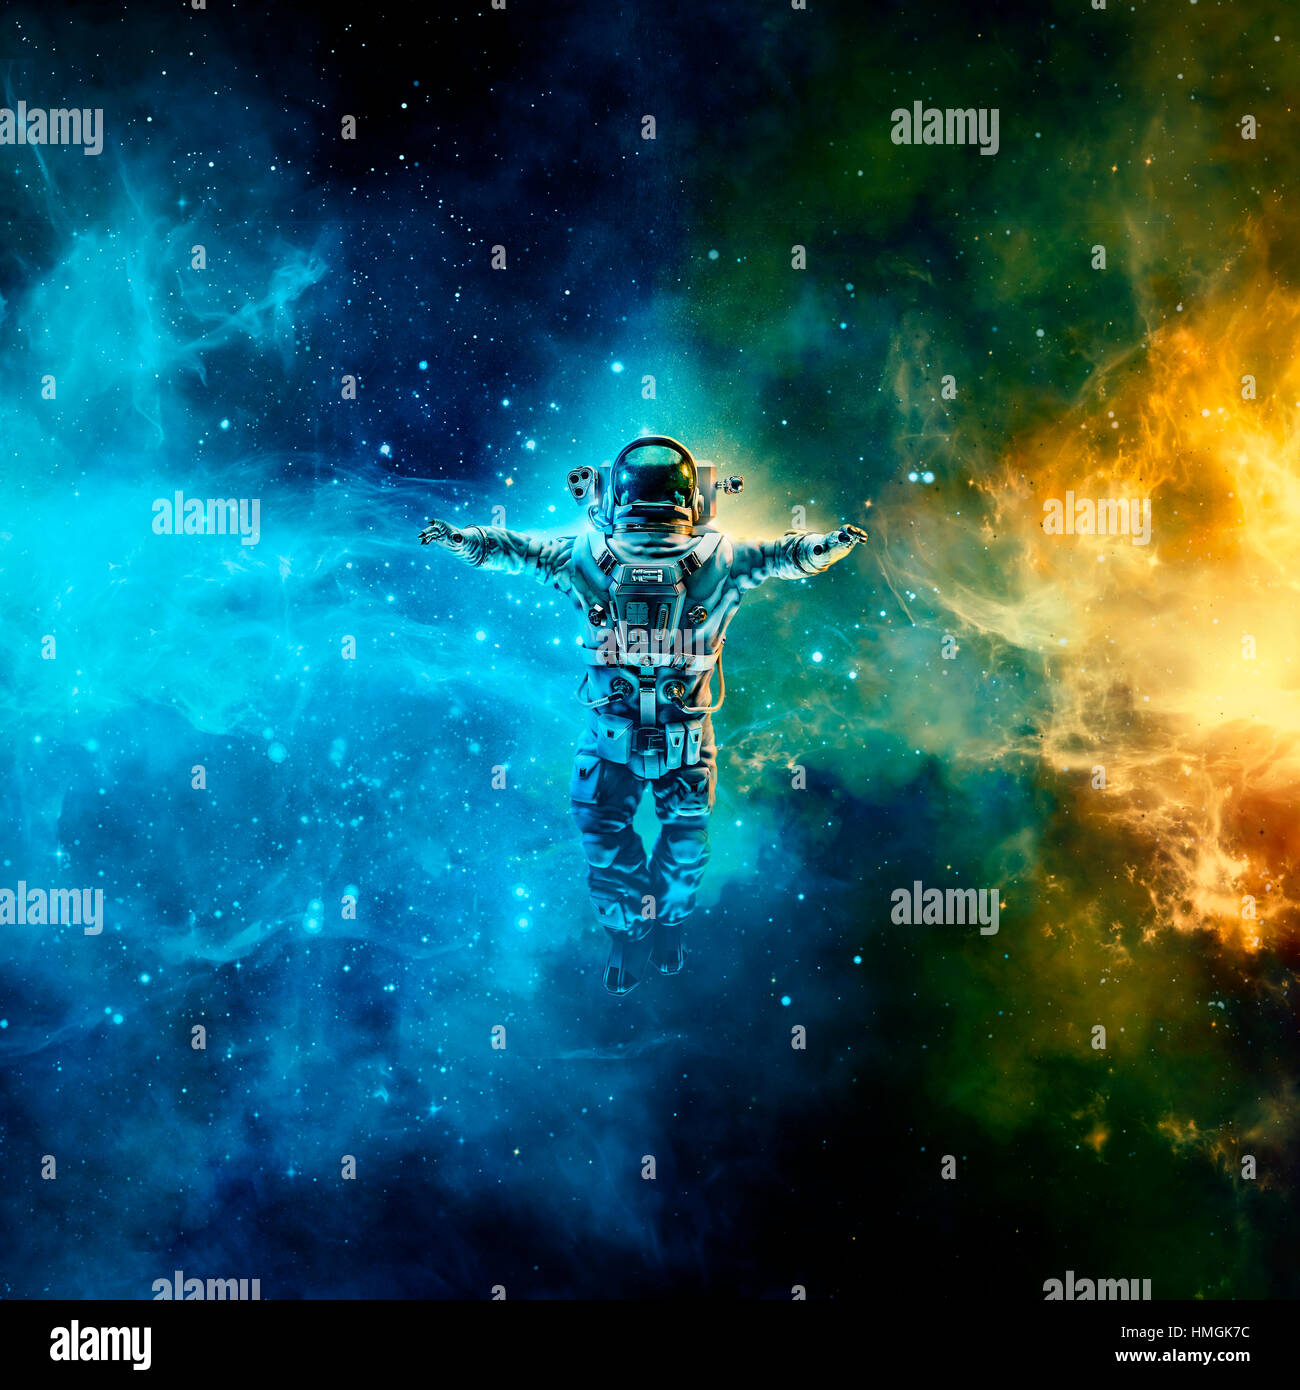 Astronaut in space / 3D illustration of astronaut floating in space between glowing galaxies Stock Photo